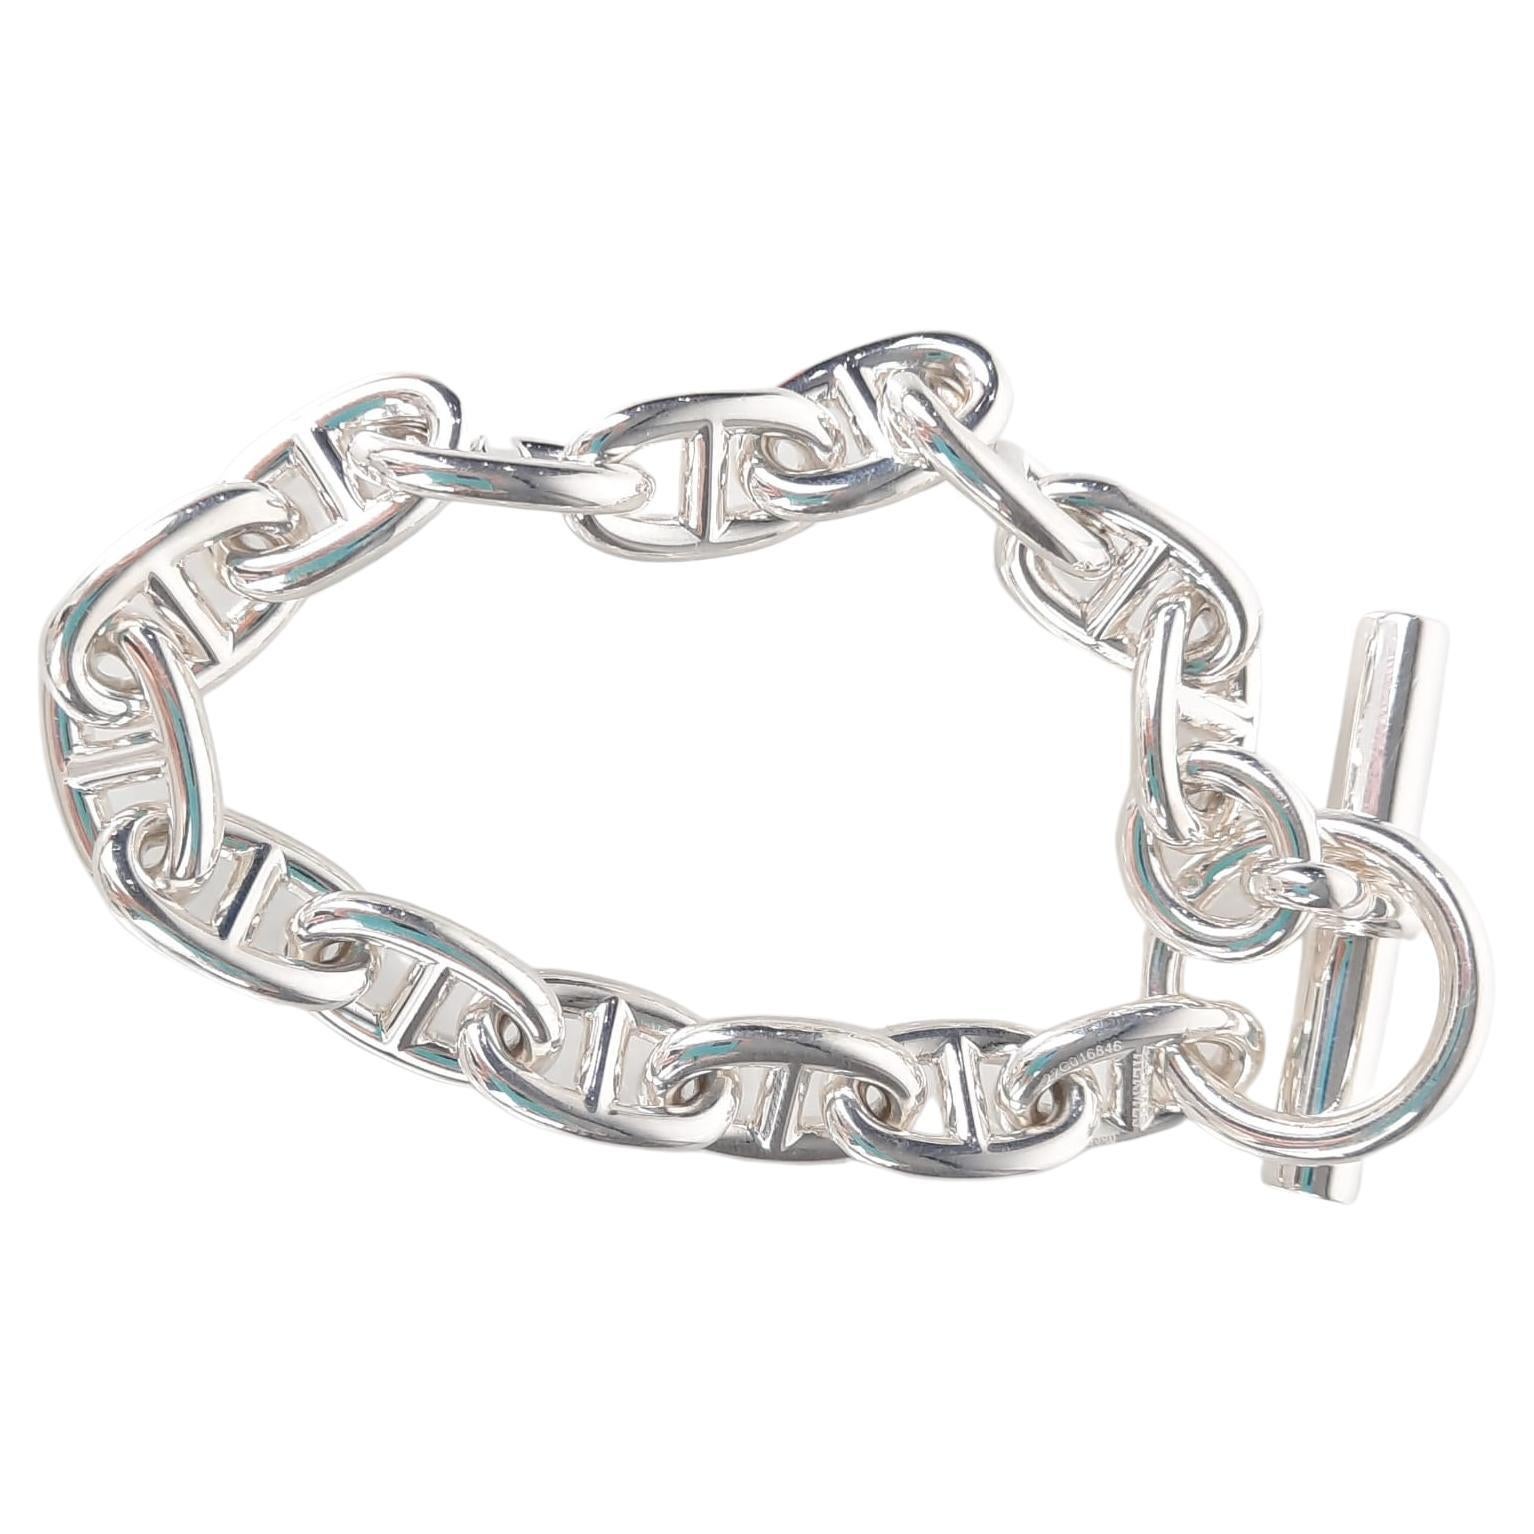 Hermes Chaine d'Ancre bracelet, large size 12 Silver 925/1000 at 1stDibs